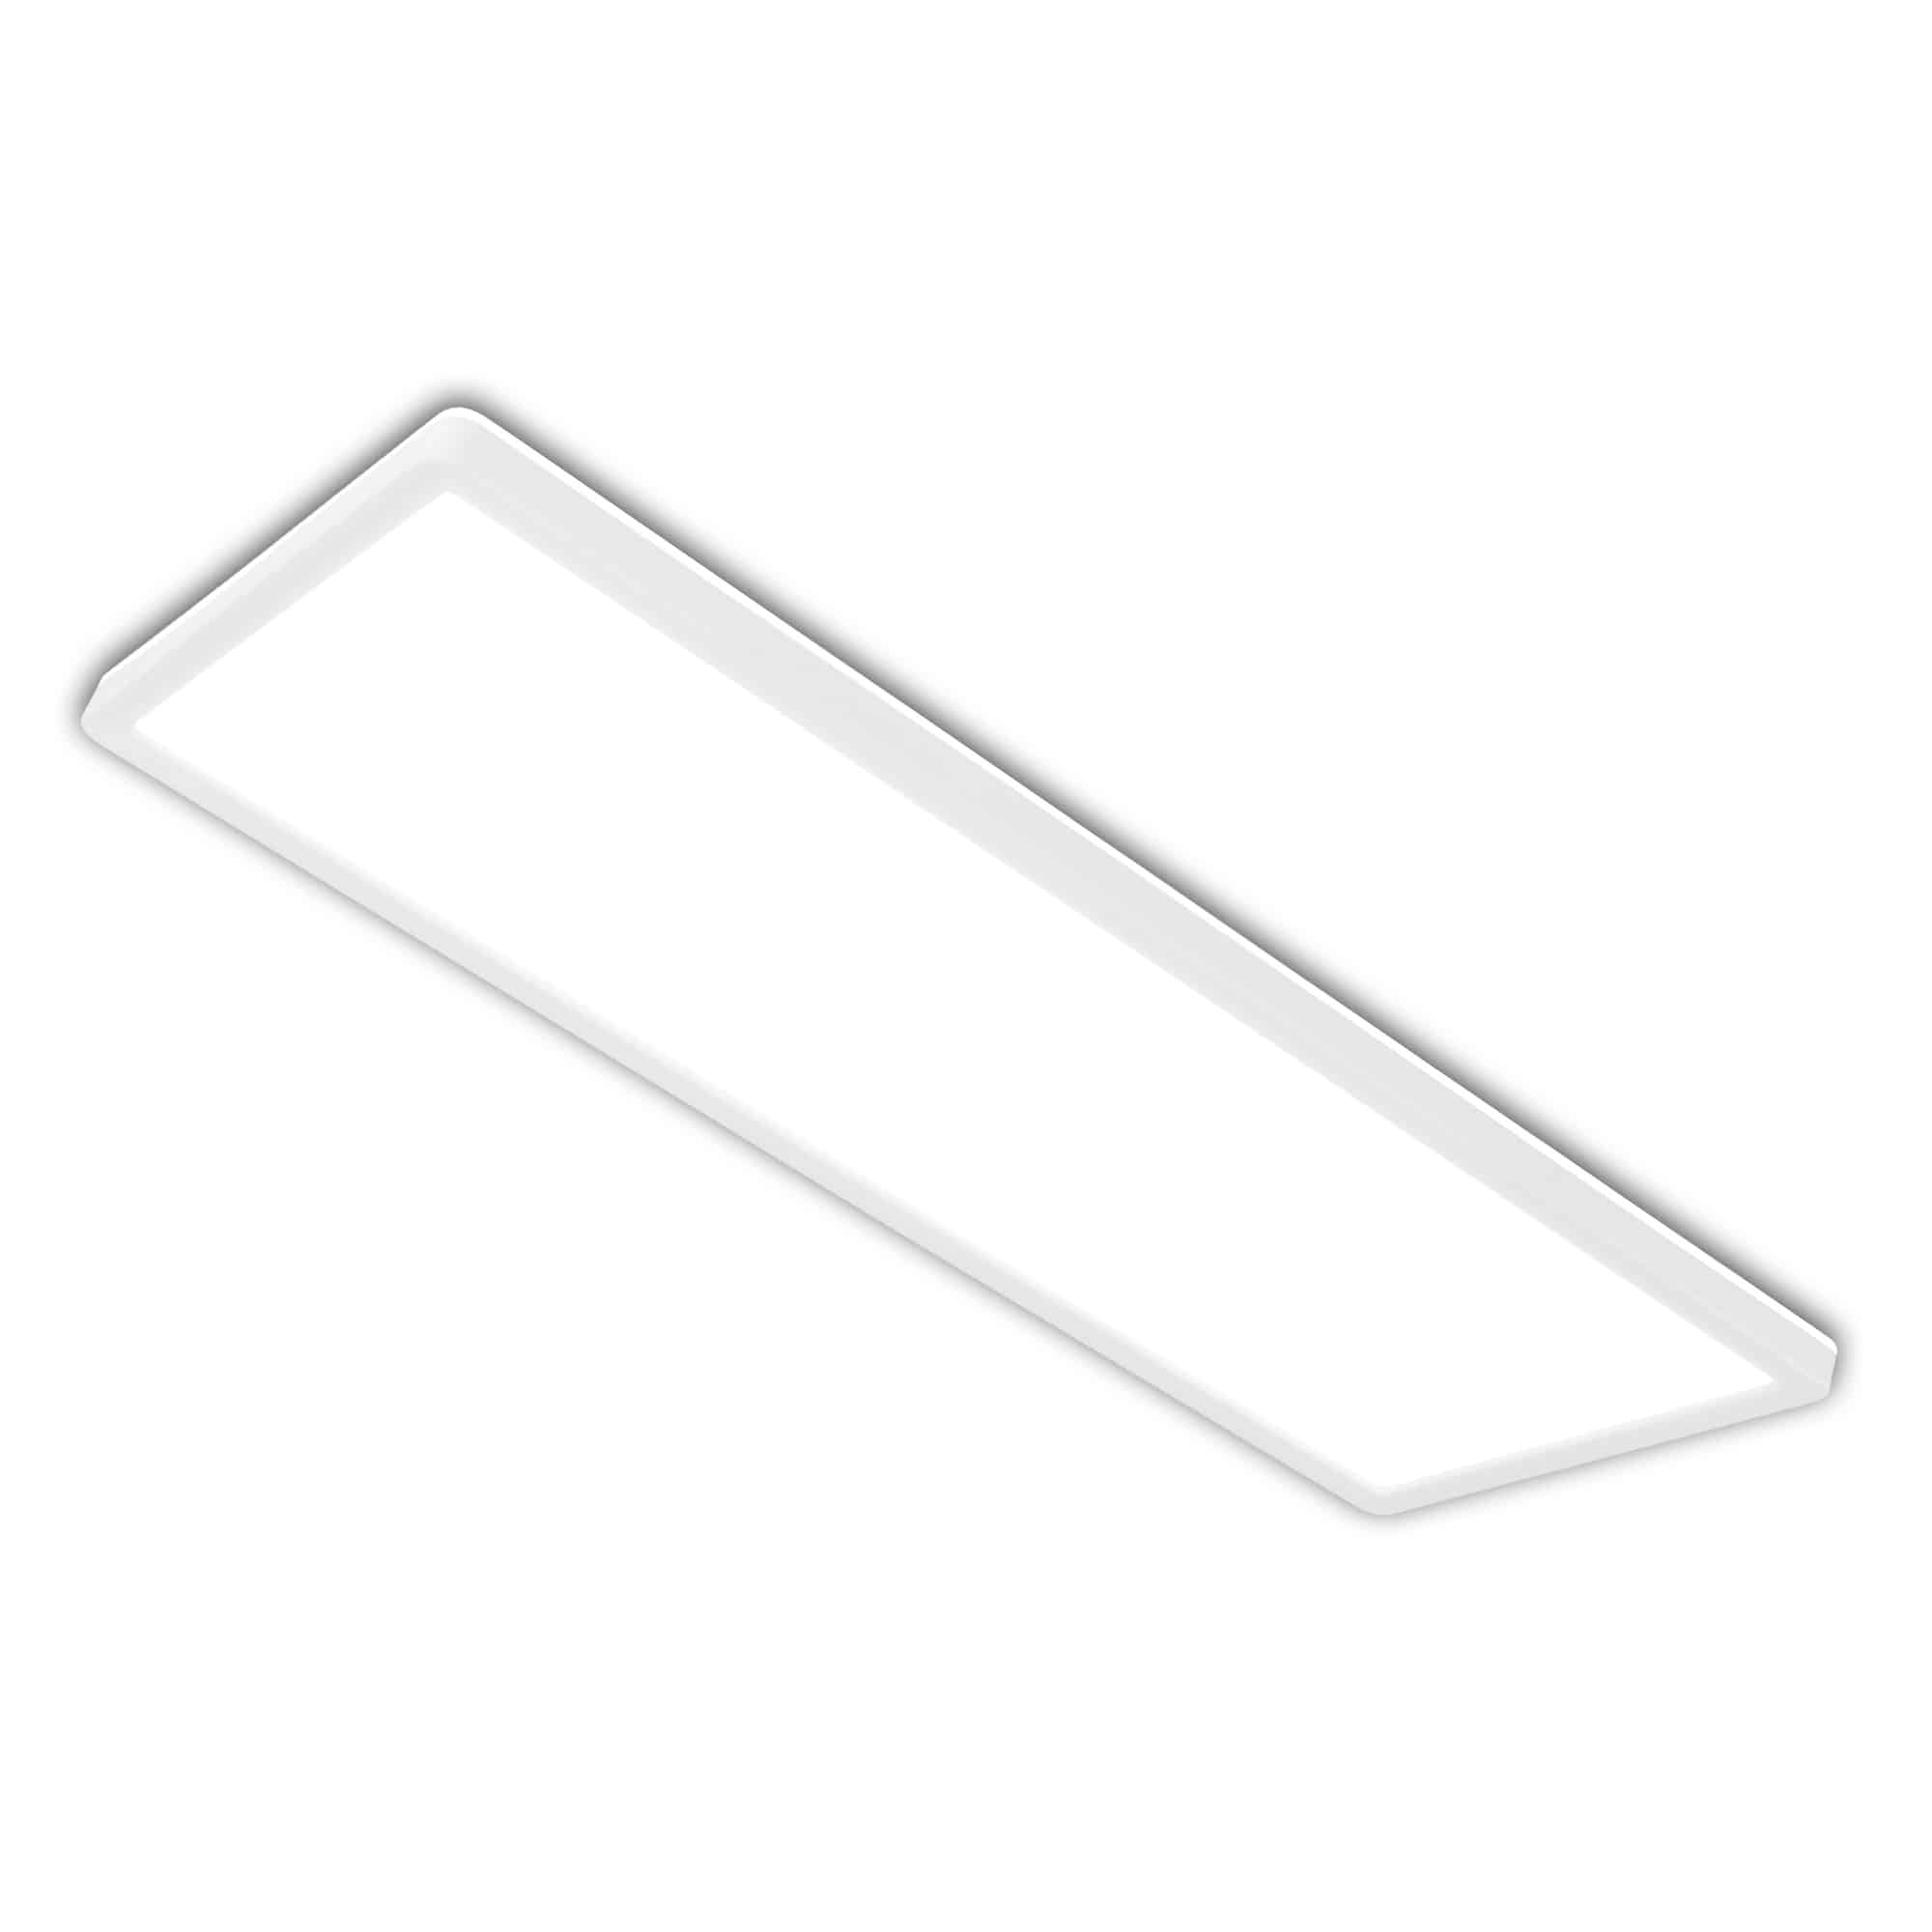 Ultraflaches LED -paneel met LED -achtergrondverlichting, 58 cm, LED, 22 W, 3000 lm, wit